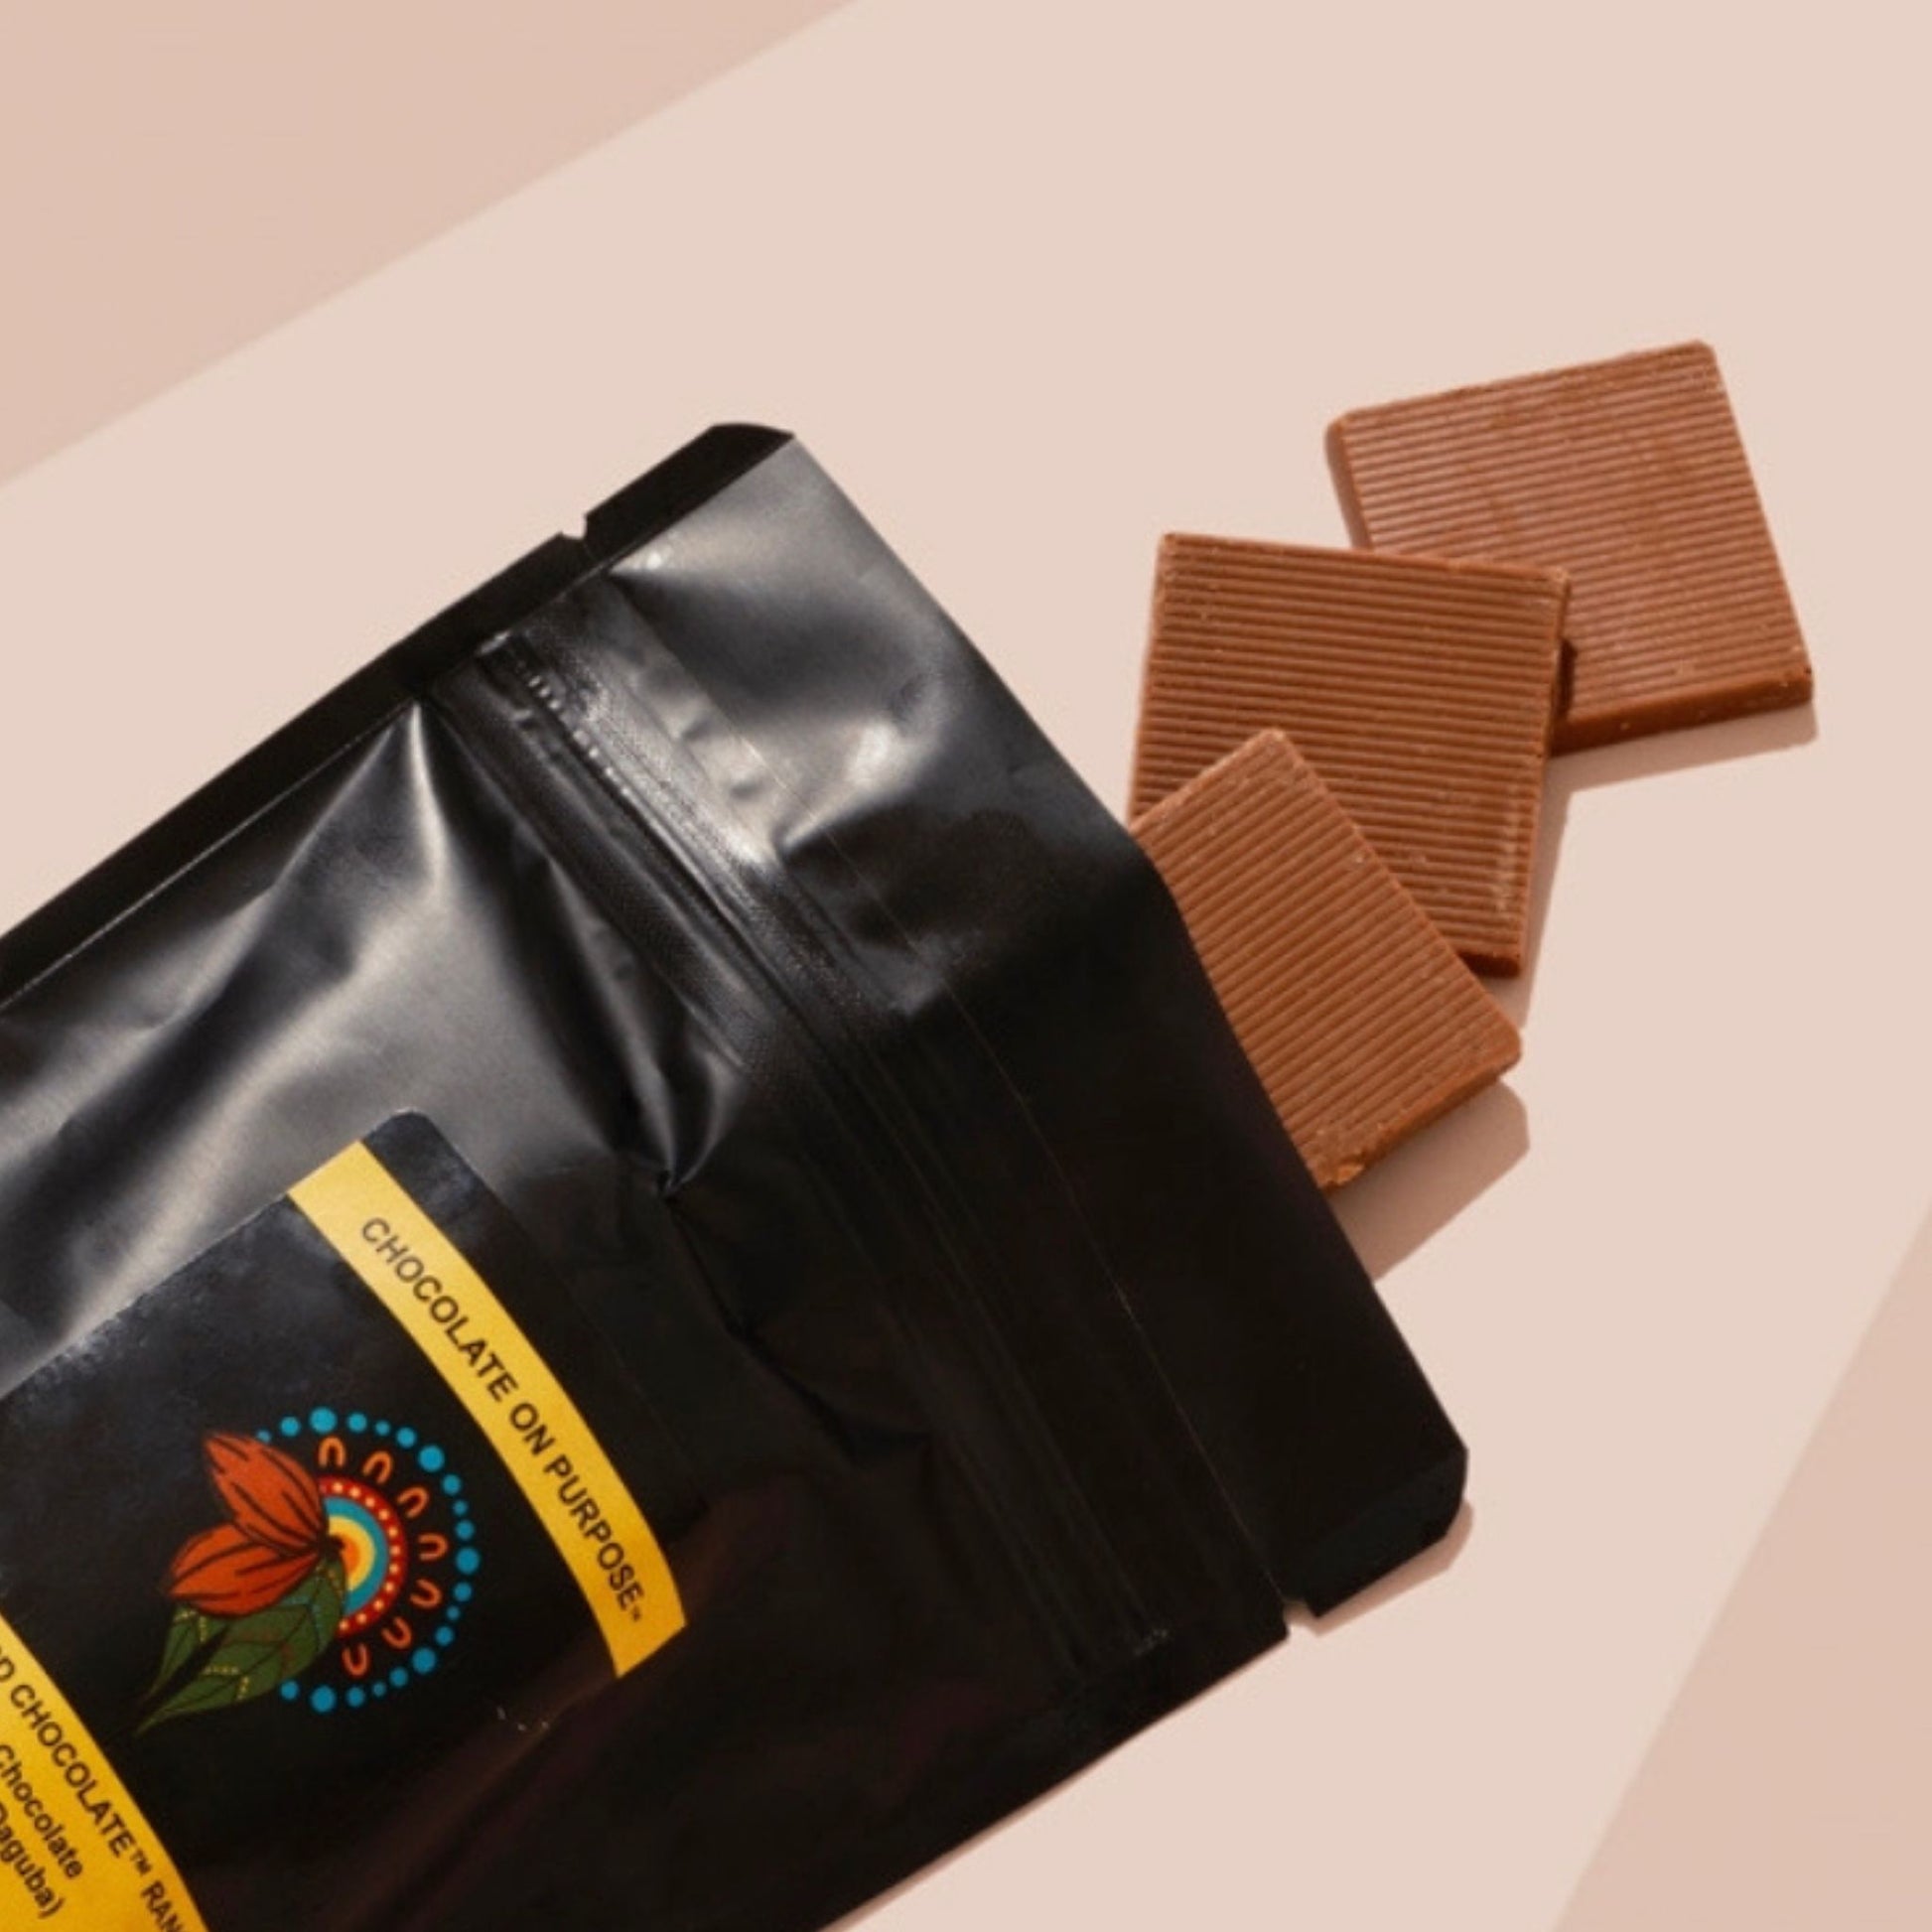 Black bag of Milk Chocoalte Riberra with 3 pieces falling out. Pink beige background 